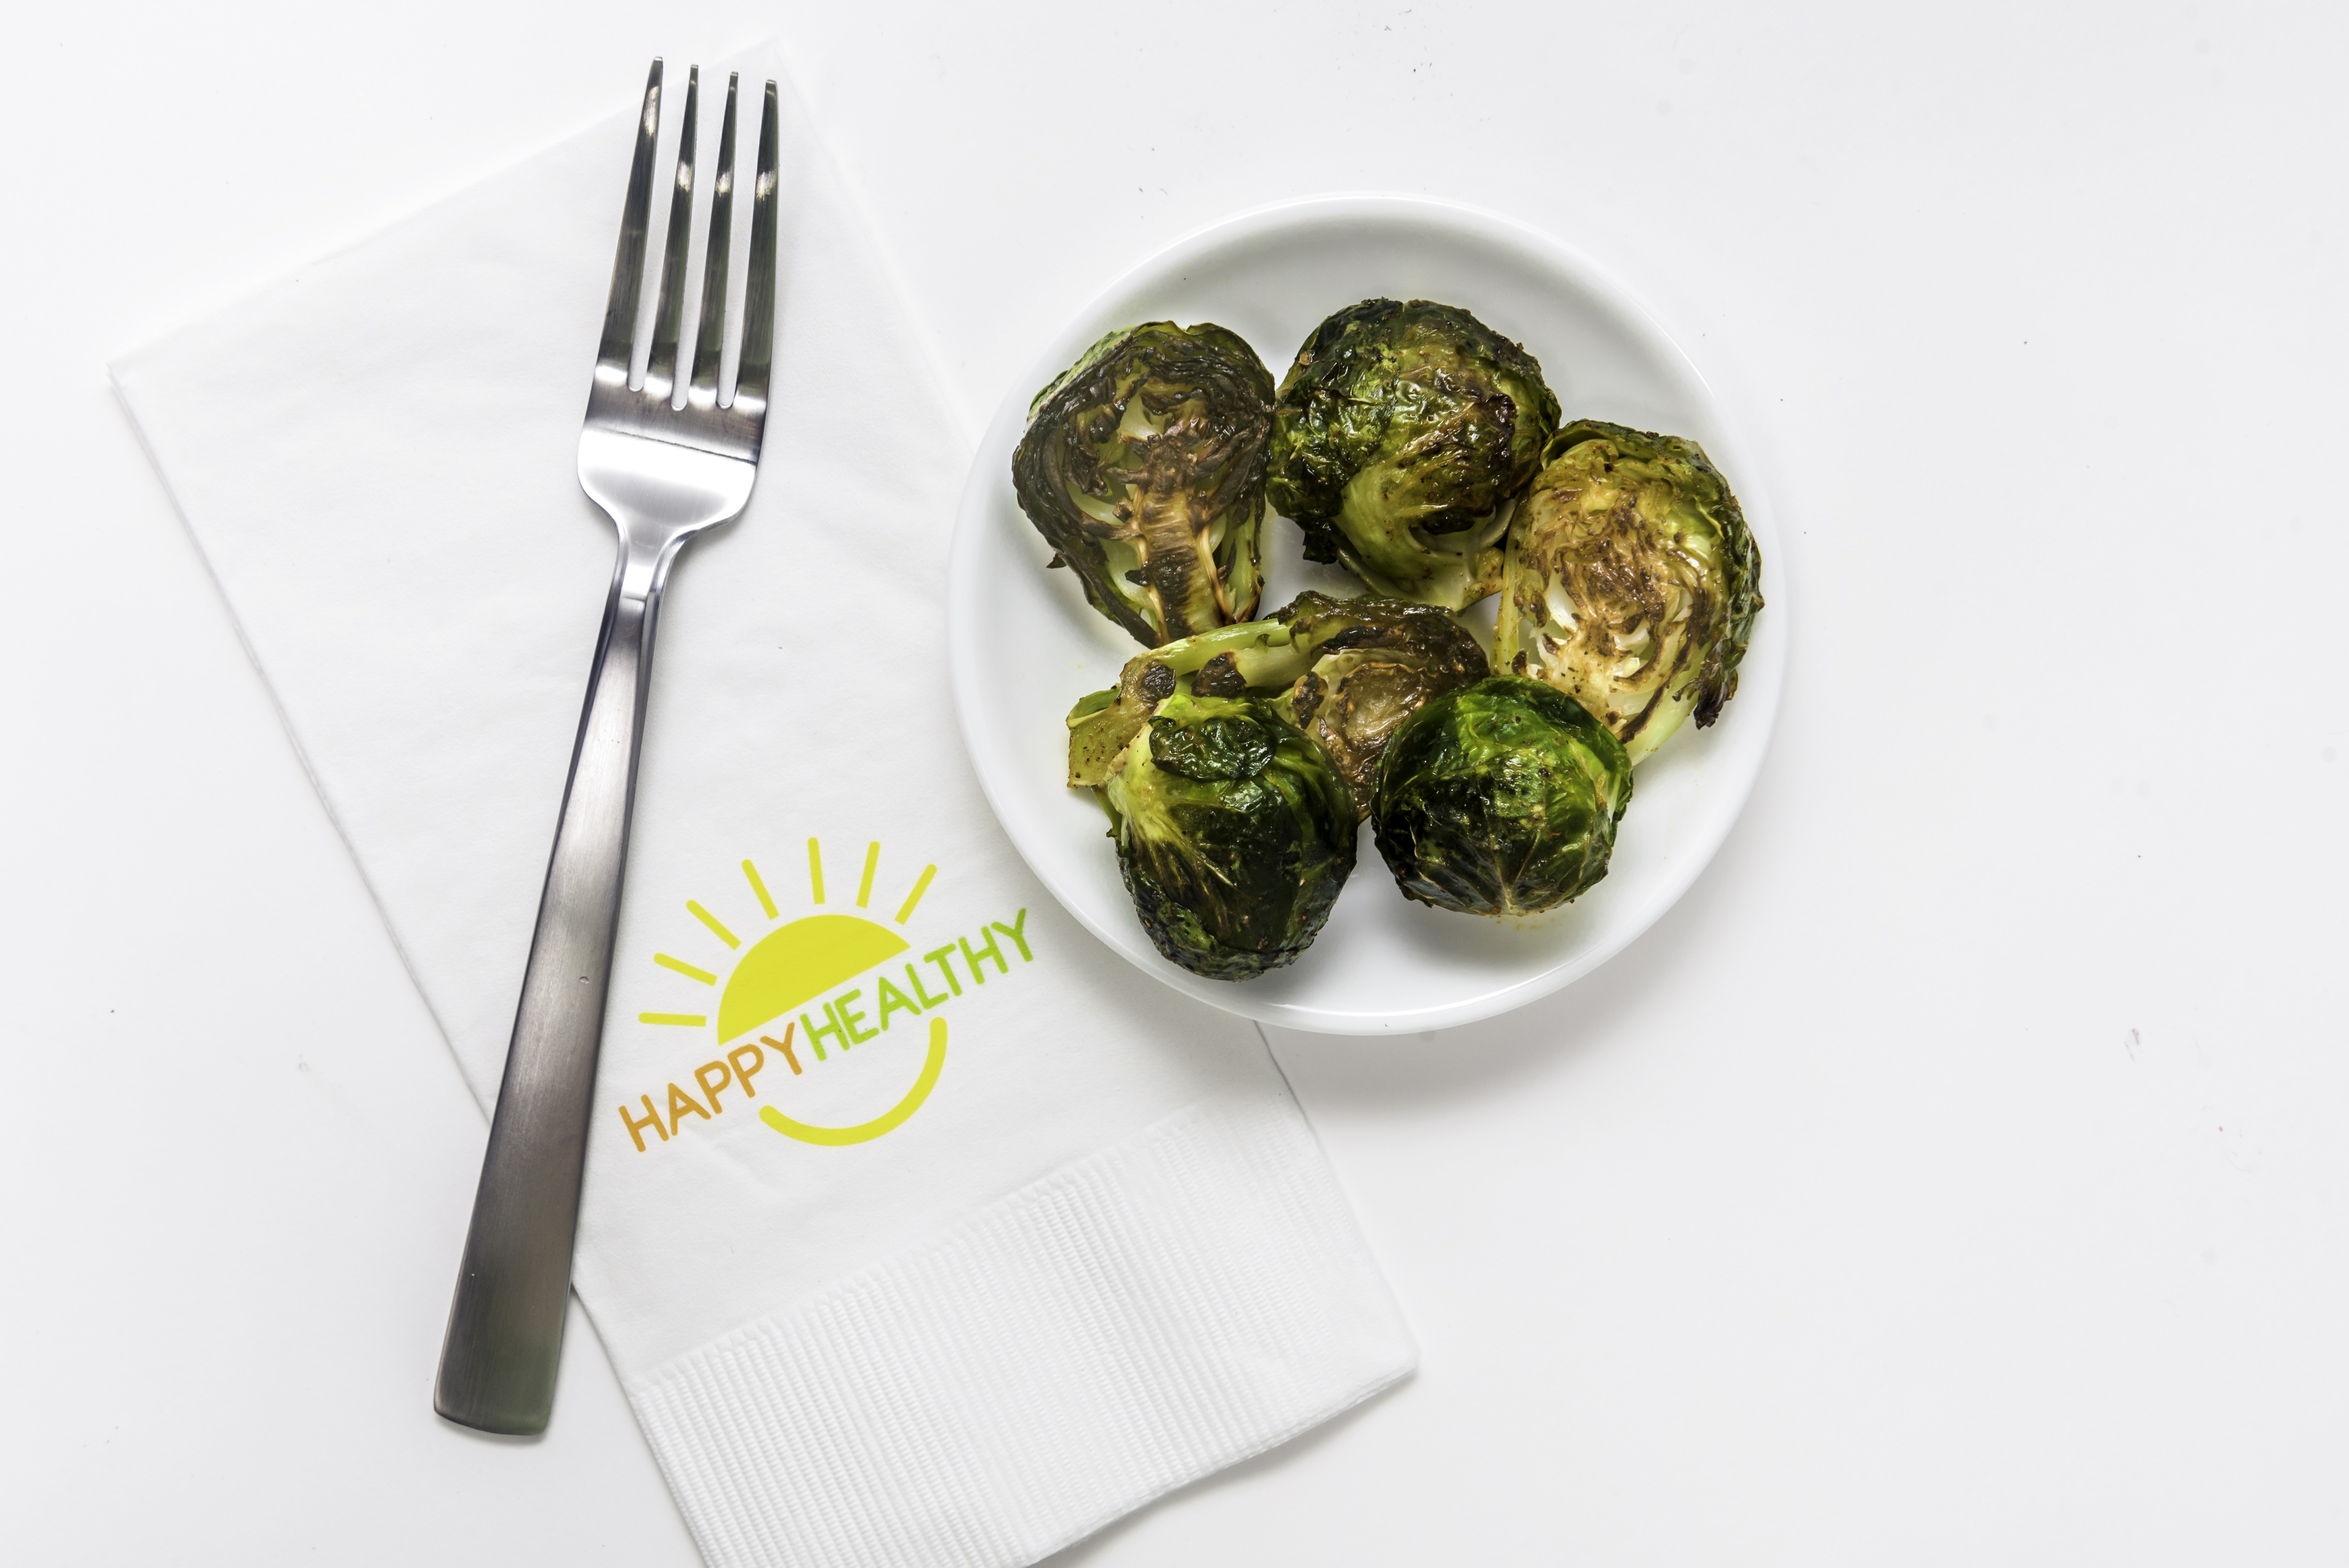 Bowl of roasted brussels sprouts beside napkin and fork